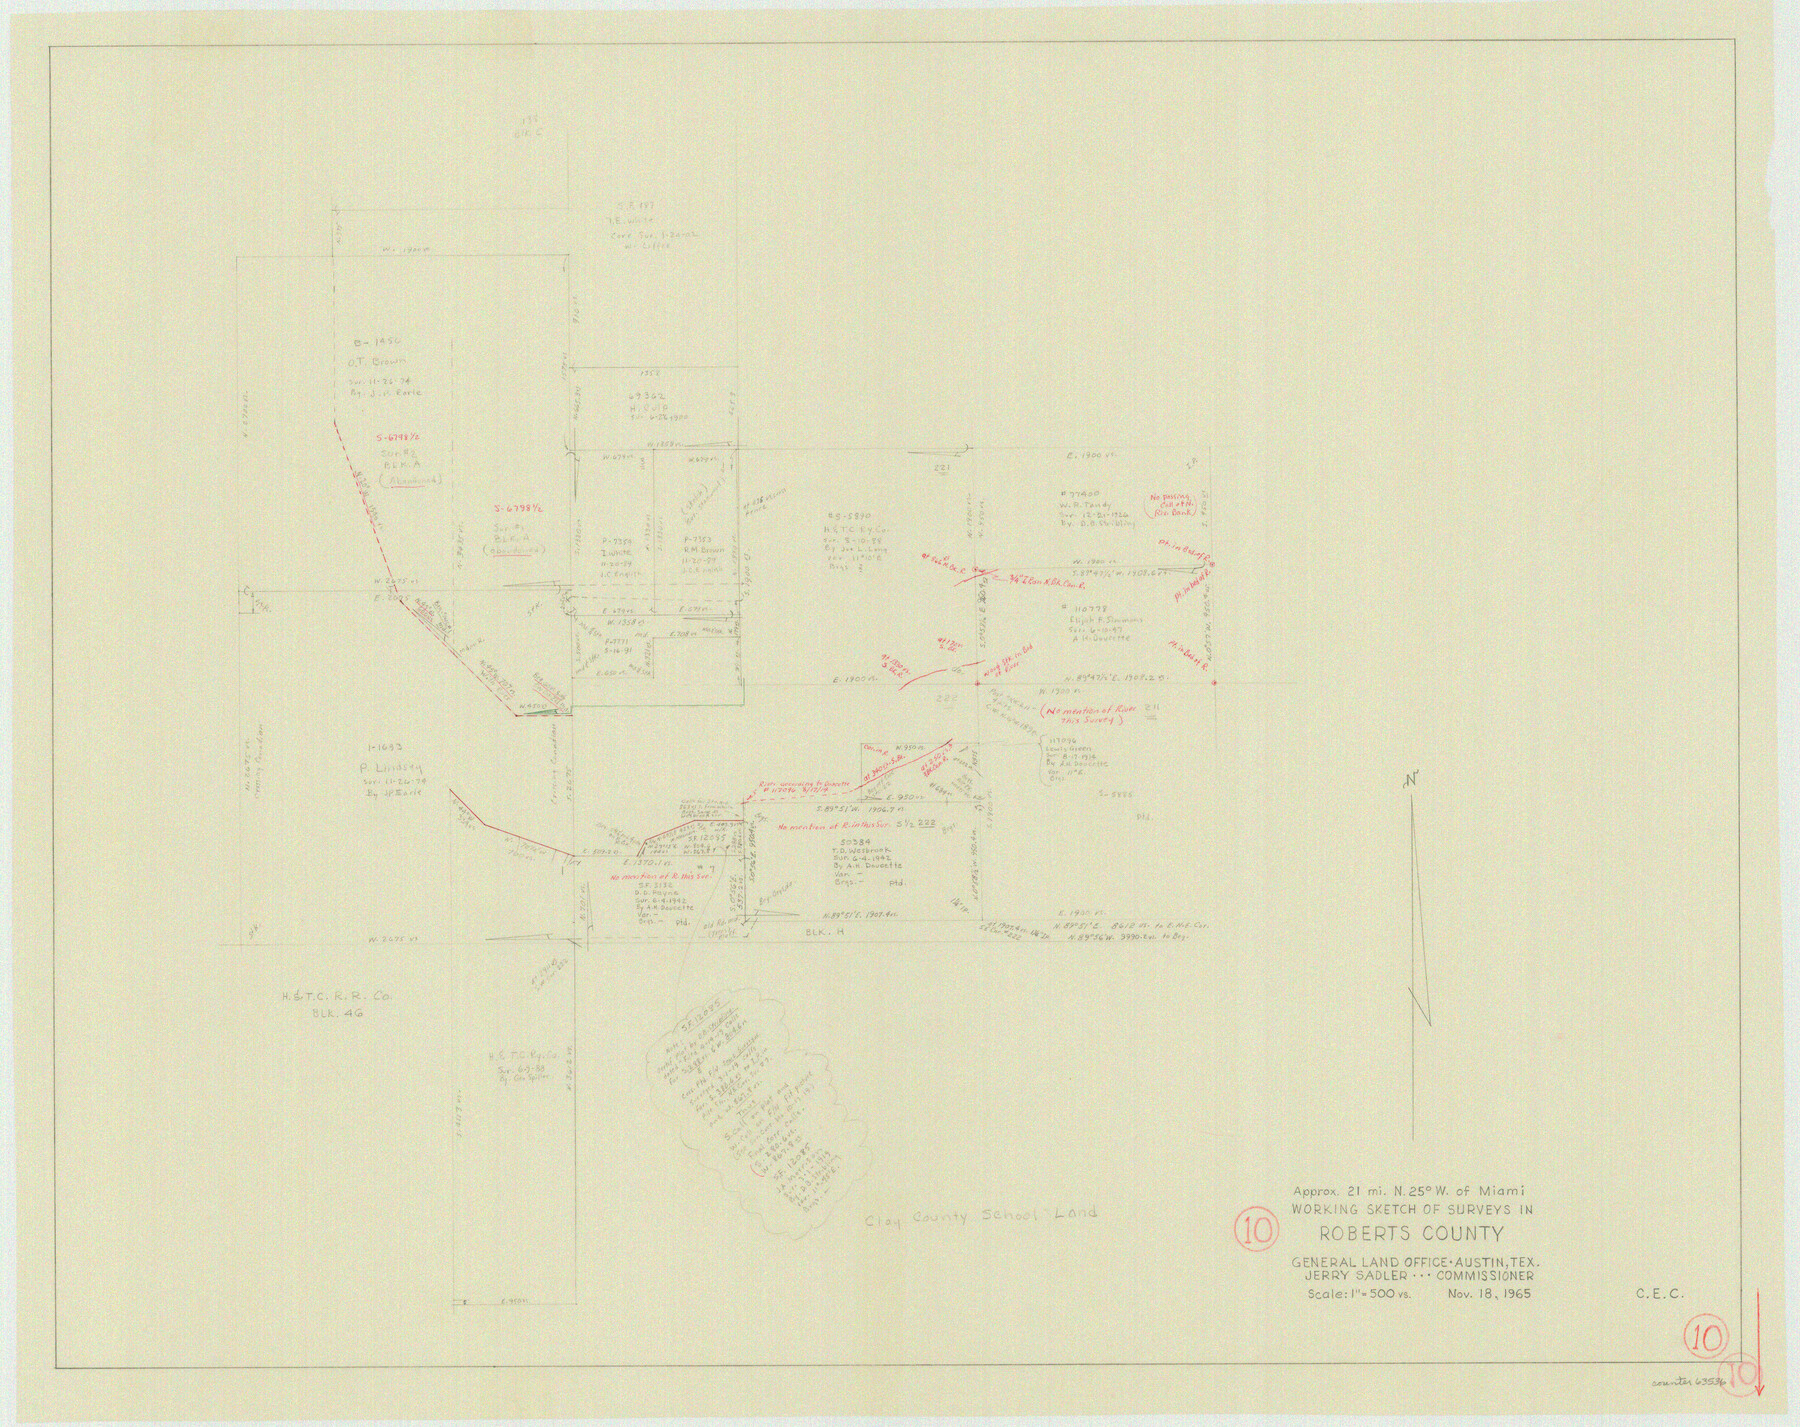 63536, Roberts County Working Sketch 10, General Map Collection